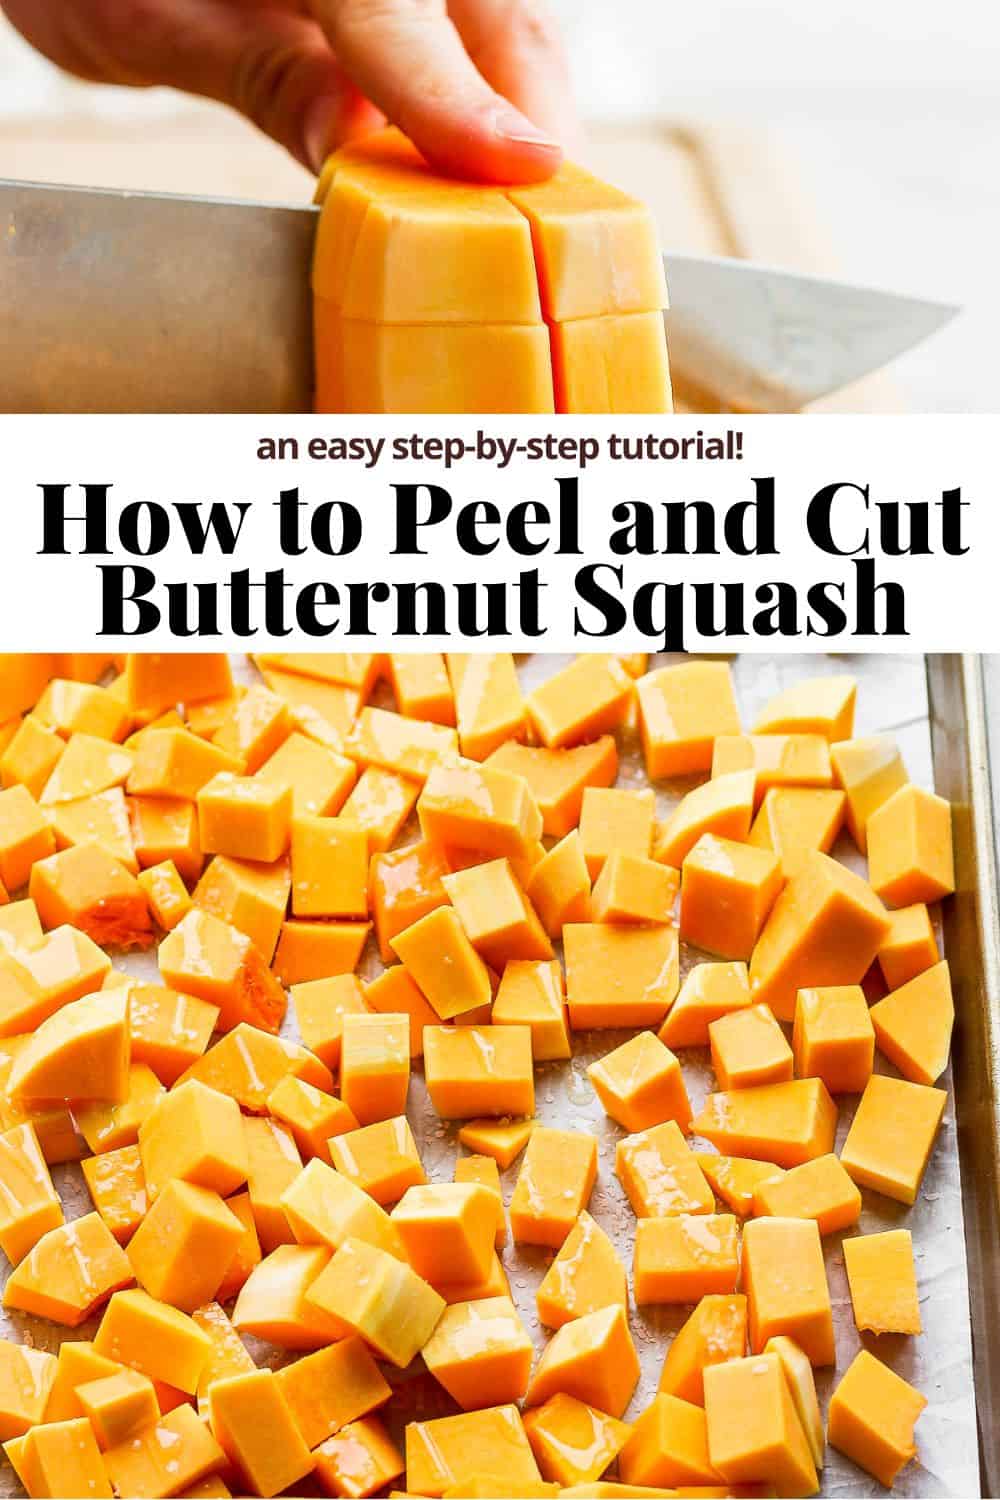 Pinterest image for how to cut and peel butternut squash.